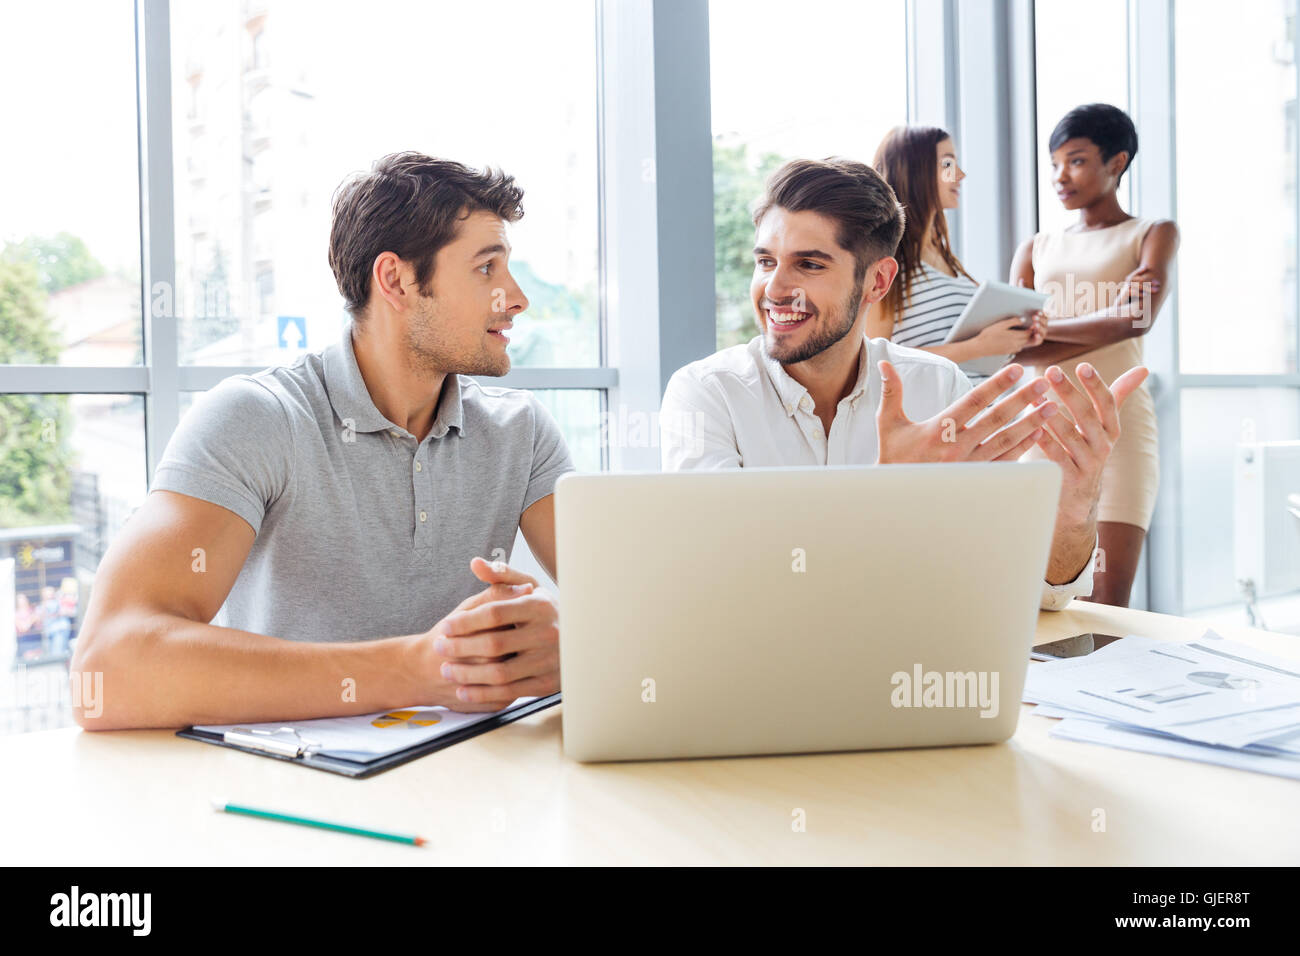 Happy young businessmen and businesswomen working in office Stock Photo